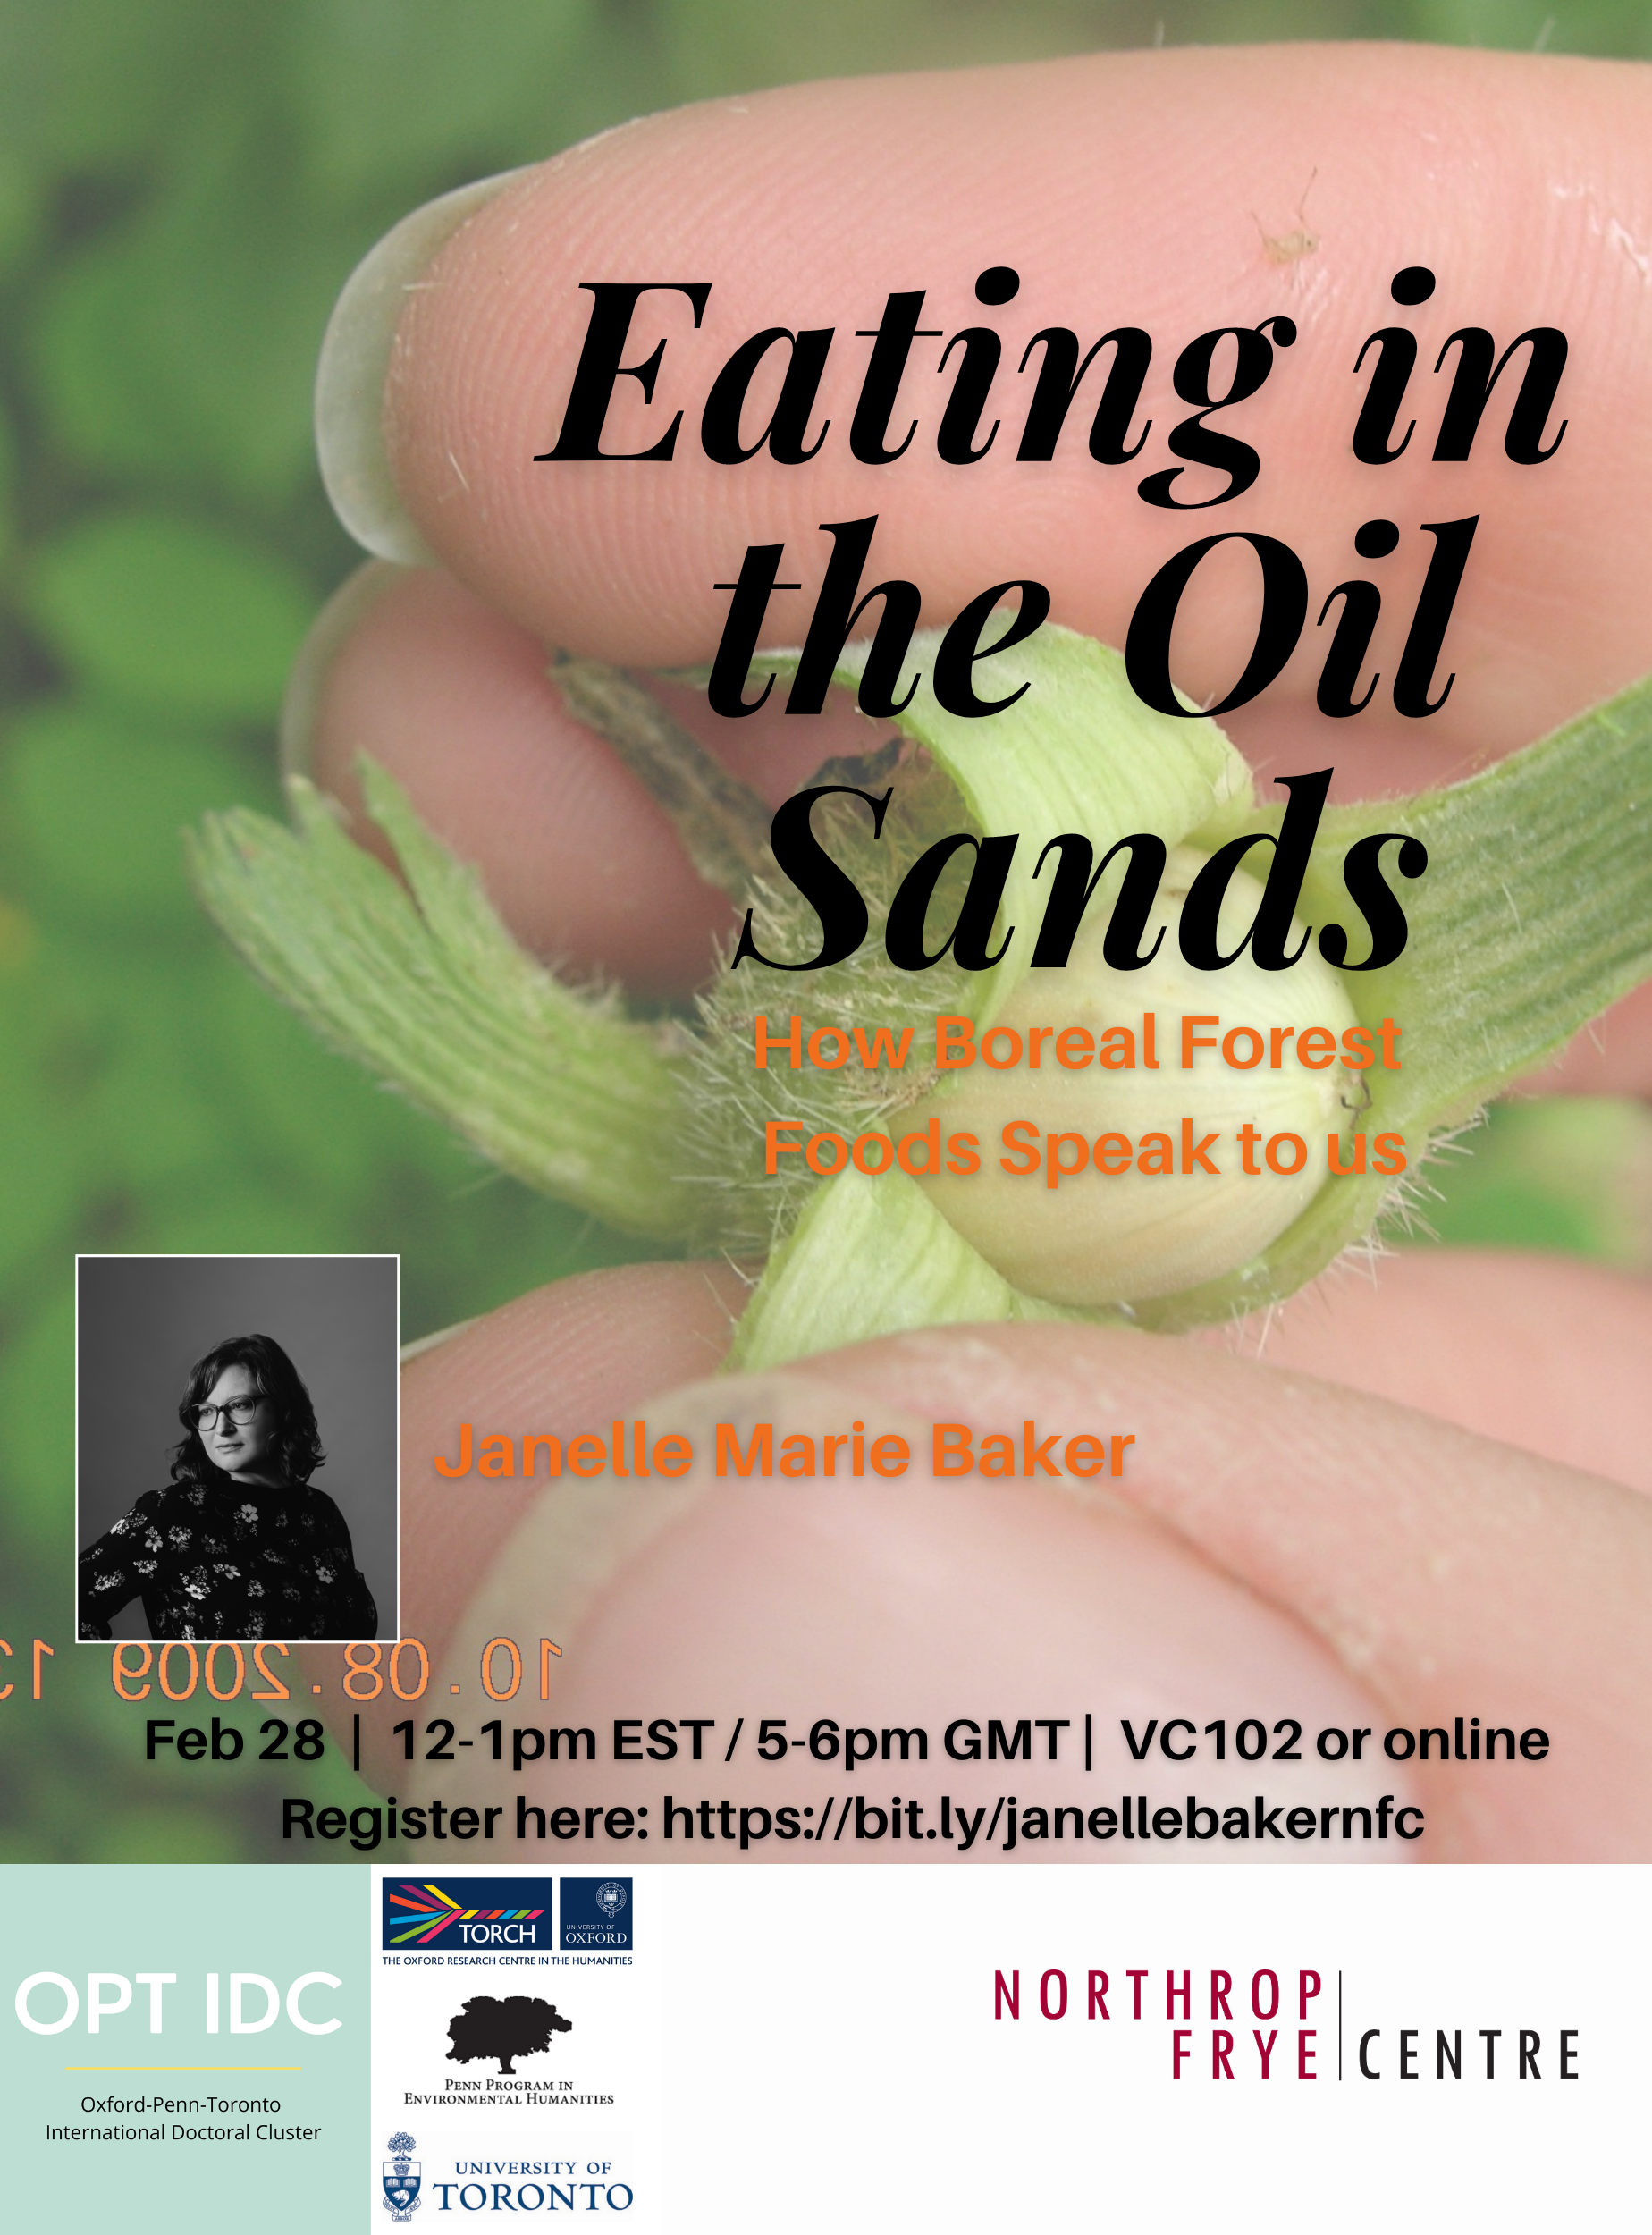 "Eating the Oil Sands" event poster